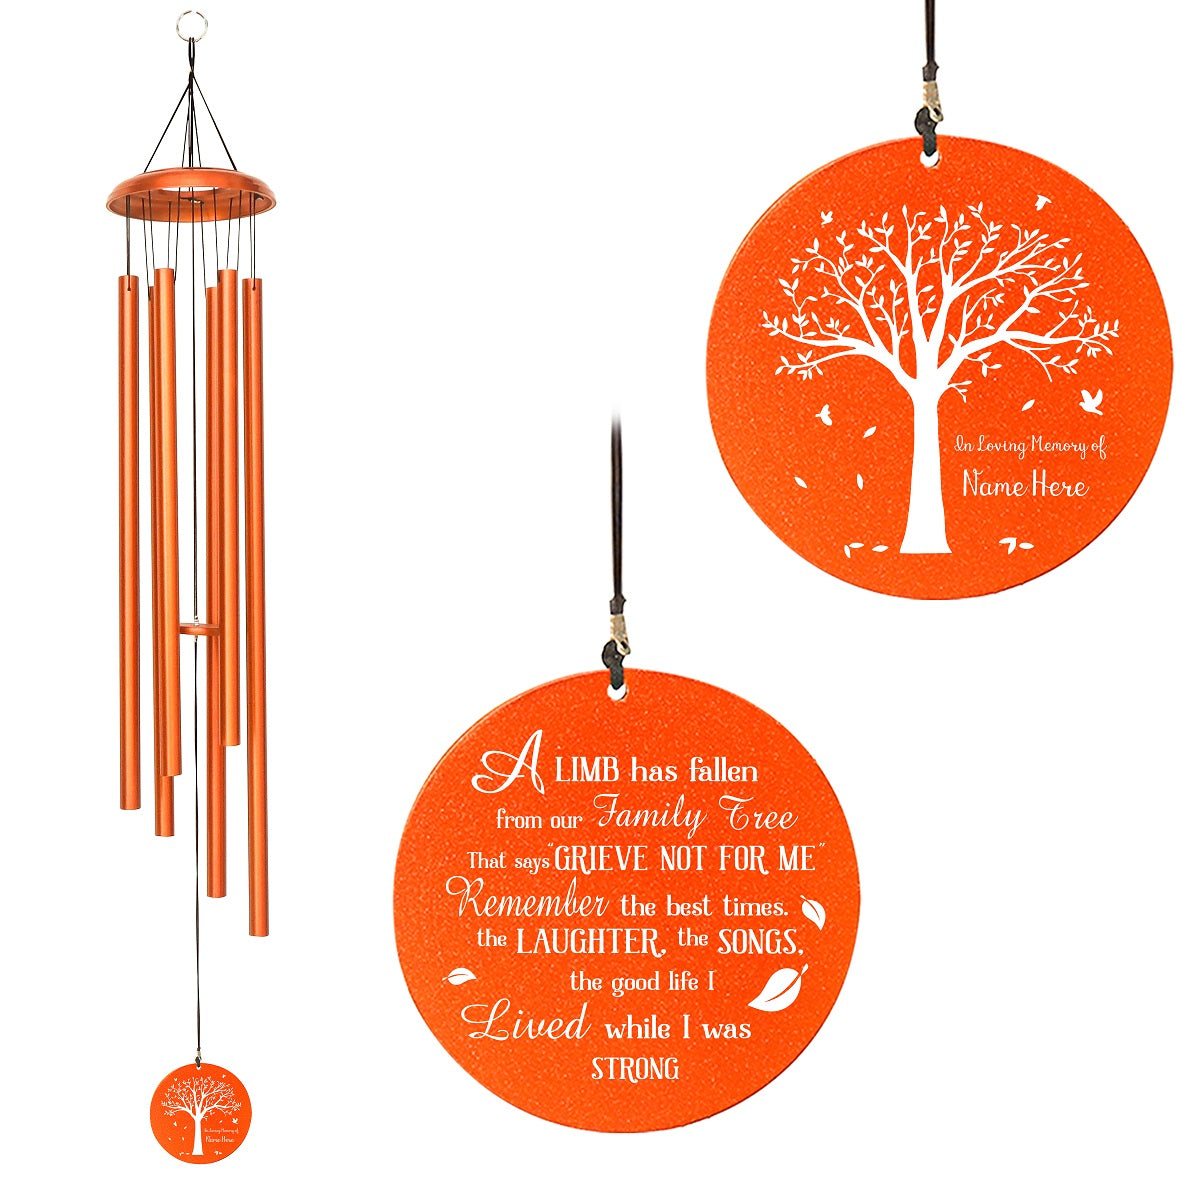 Personalized Memorial Wind Chime MWC134